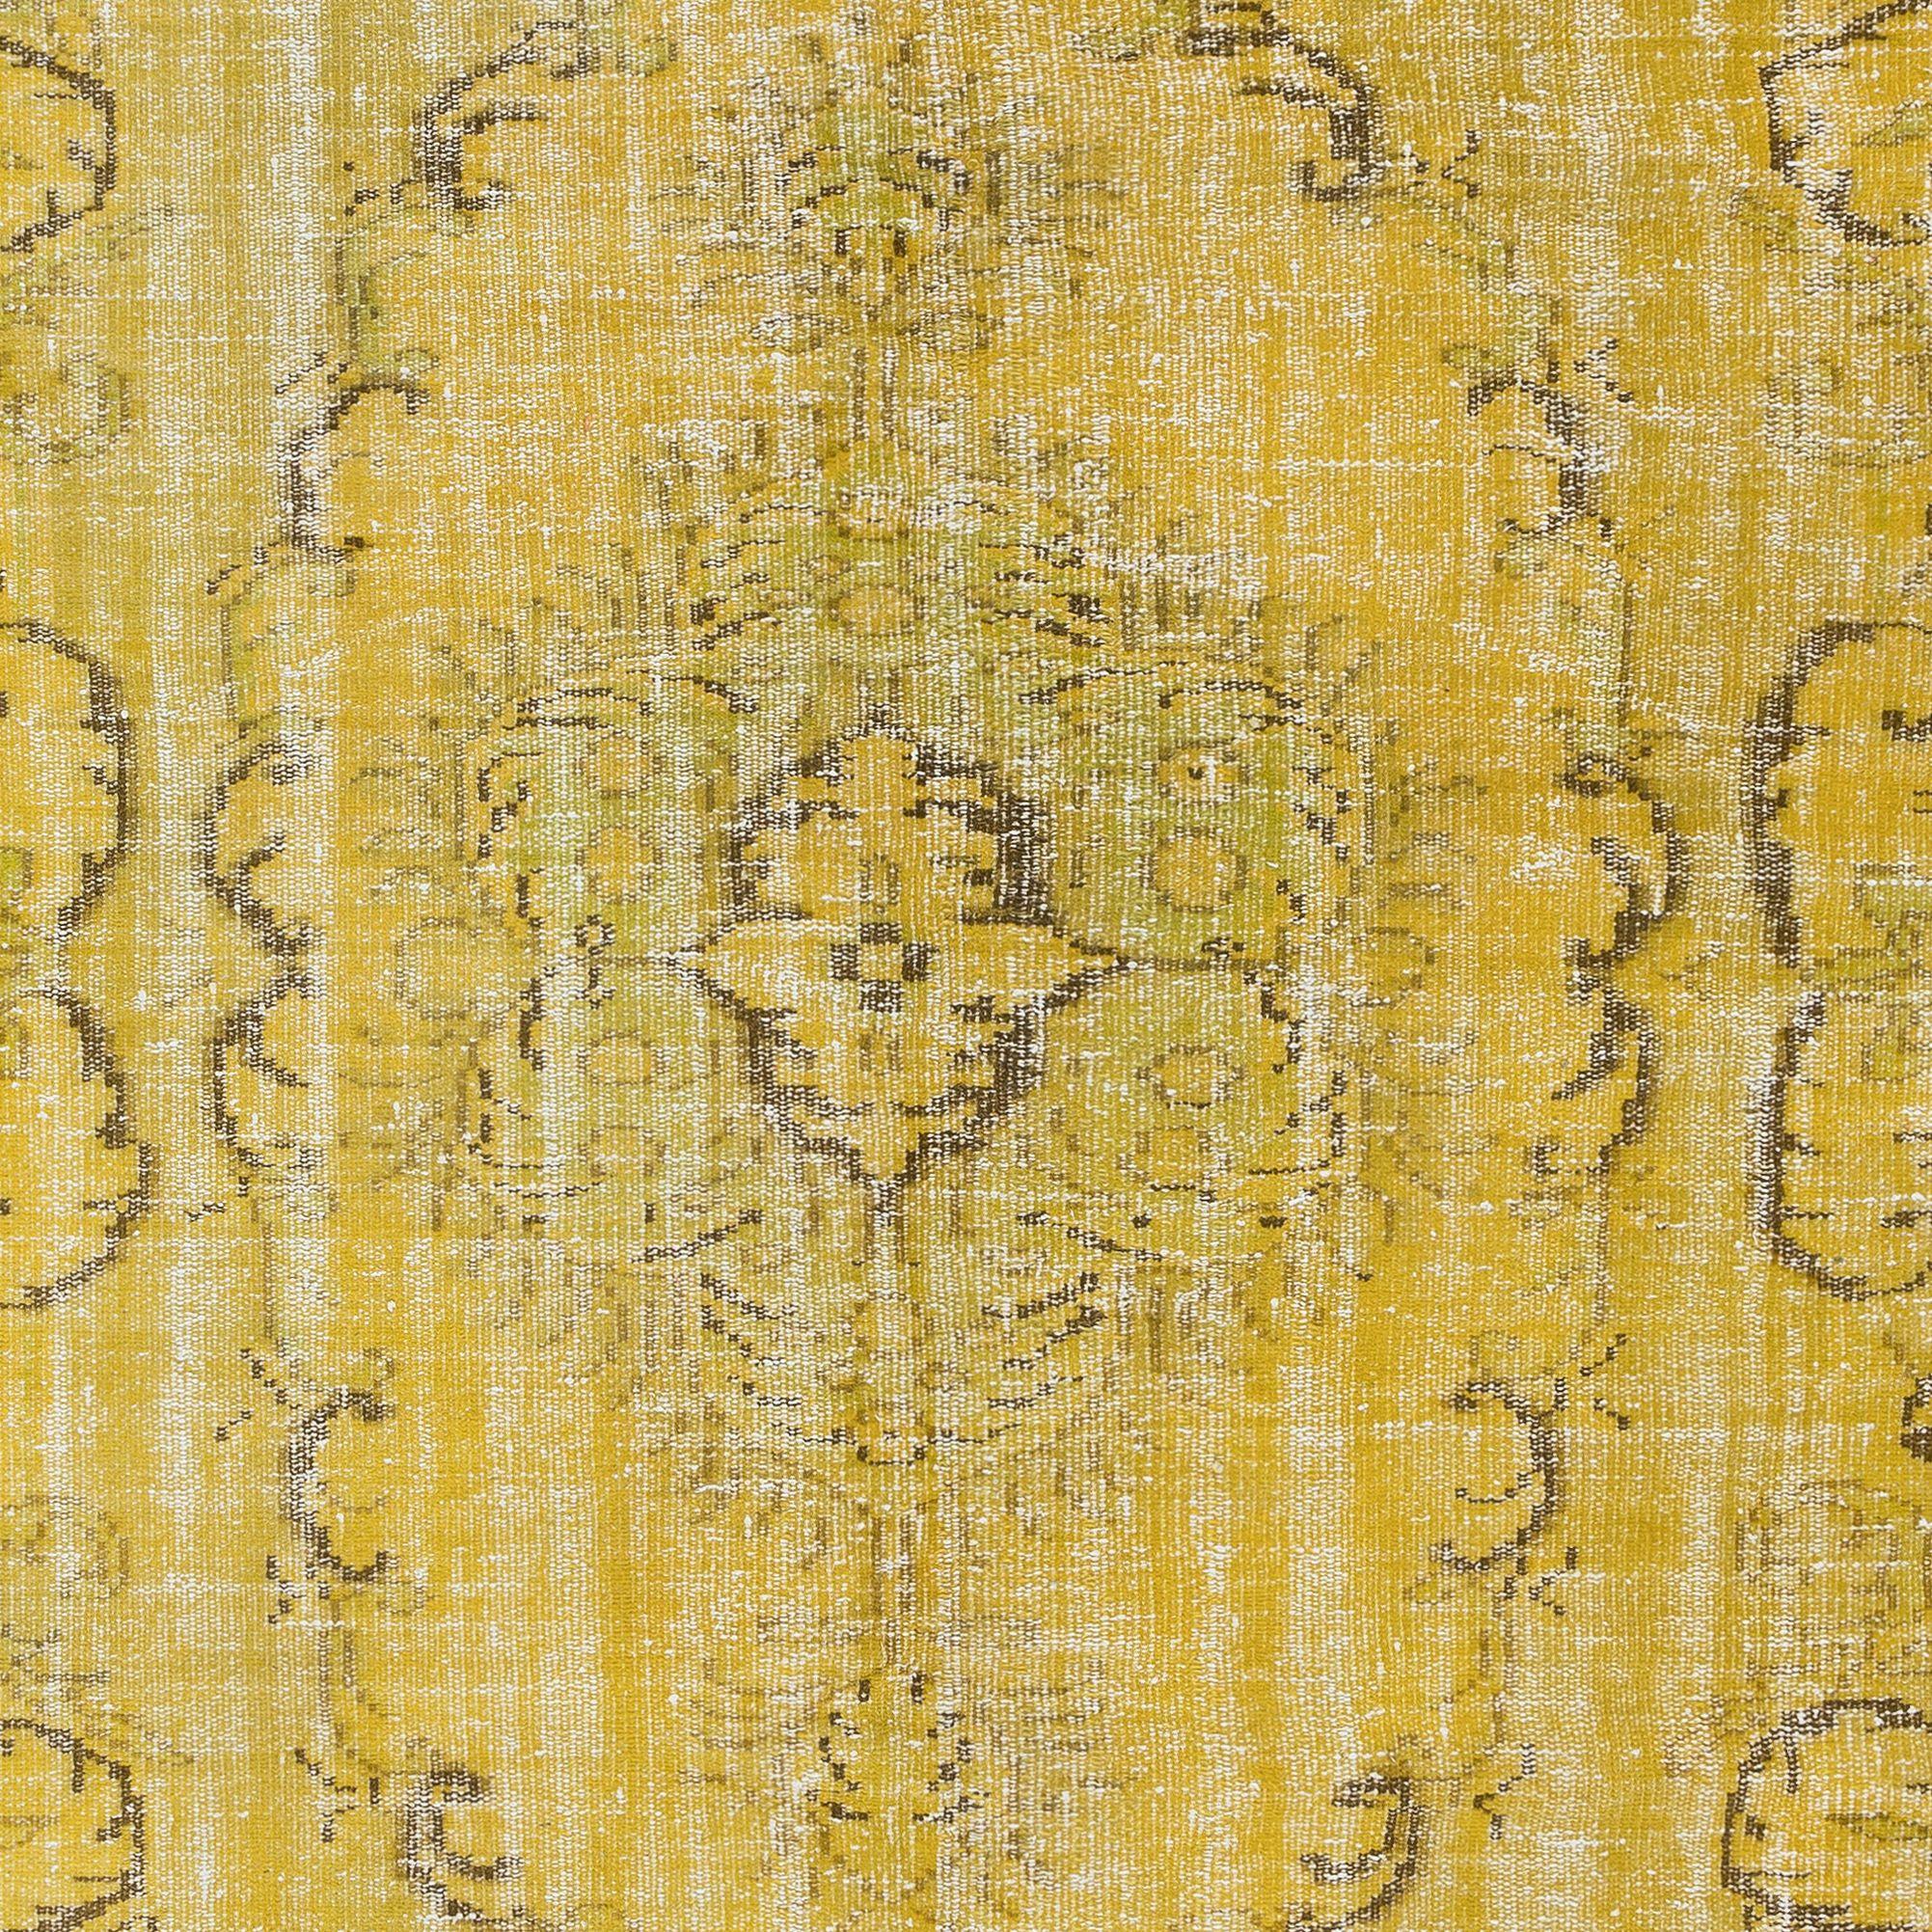 Modern 5.4x8.6 Ft Upcycled Handmade Turkish Area Rug, Yellow Over-Dyed Wool Carpet For Sale